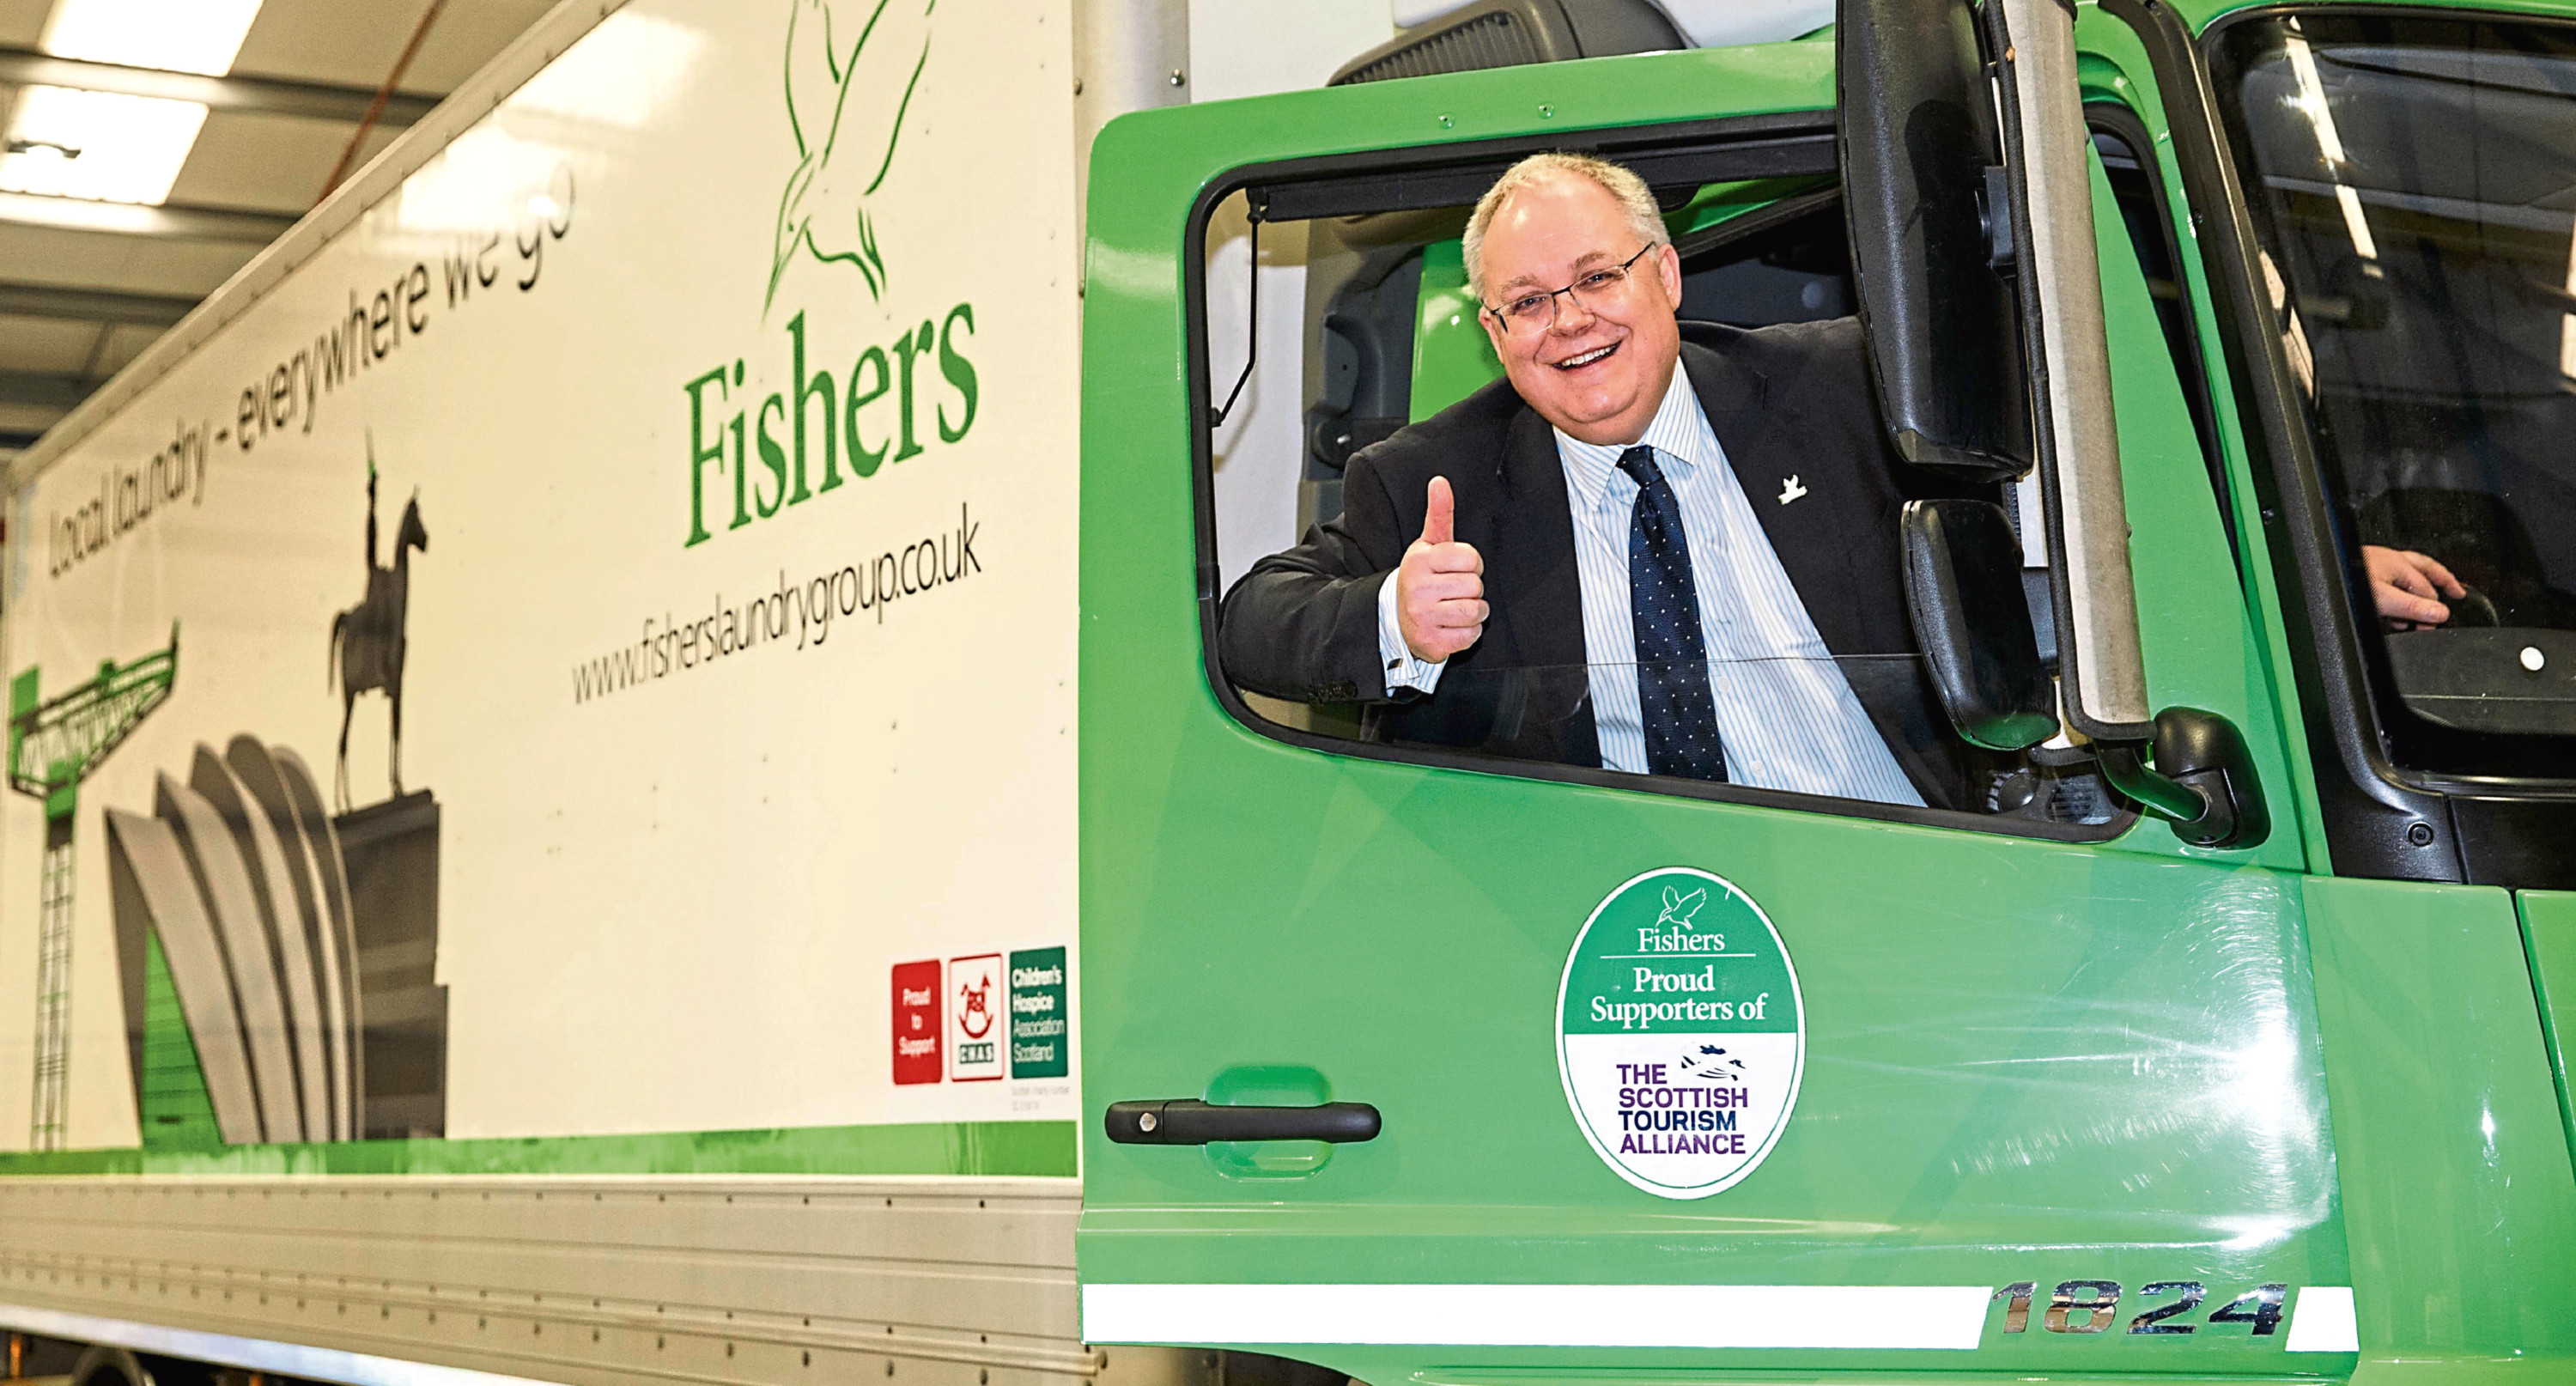 Michael Jones, Fishers MD
Michael Jones MD of Fishers Laundry in the driving seat at the unveiling of new truck livery at super laundry opening in Coatbridge.  Picture Robert Perry 17th March 2016

Please credit photo to Robert Perry

Image is free to use in connection with the promotion of the above company or organisation. 'Permissions for ALL other uses need to be sought and payment make be required.


Note to Editors:  This image is free to be used editorially in the promotion of the above company or organisation.  Without prejudice ALL other licences without prior consent will be deemed a breach of copyright under the 1988. Copyright Design and Patents Act  and will be subject to payment or legal action, where appropriate.
www.robertperry.co.uk
NB -This image is not to be distributed without the prior consent of the copyright holder.
in using this image you agree to abide by terms and conditions as stated in this caption.
All monies payable to Robert Perry

(PLEASE DO NOT REMOVE THIS CAPTION)
This image